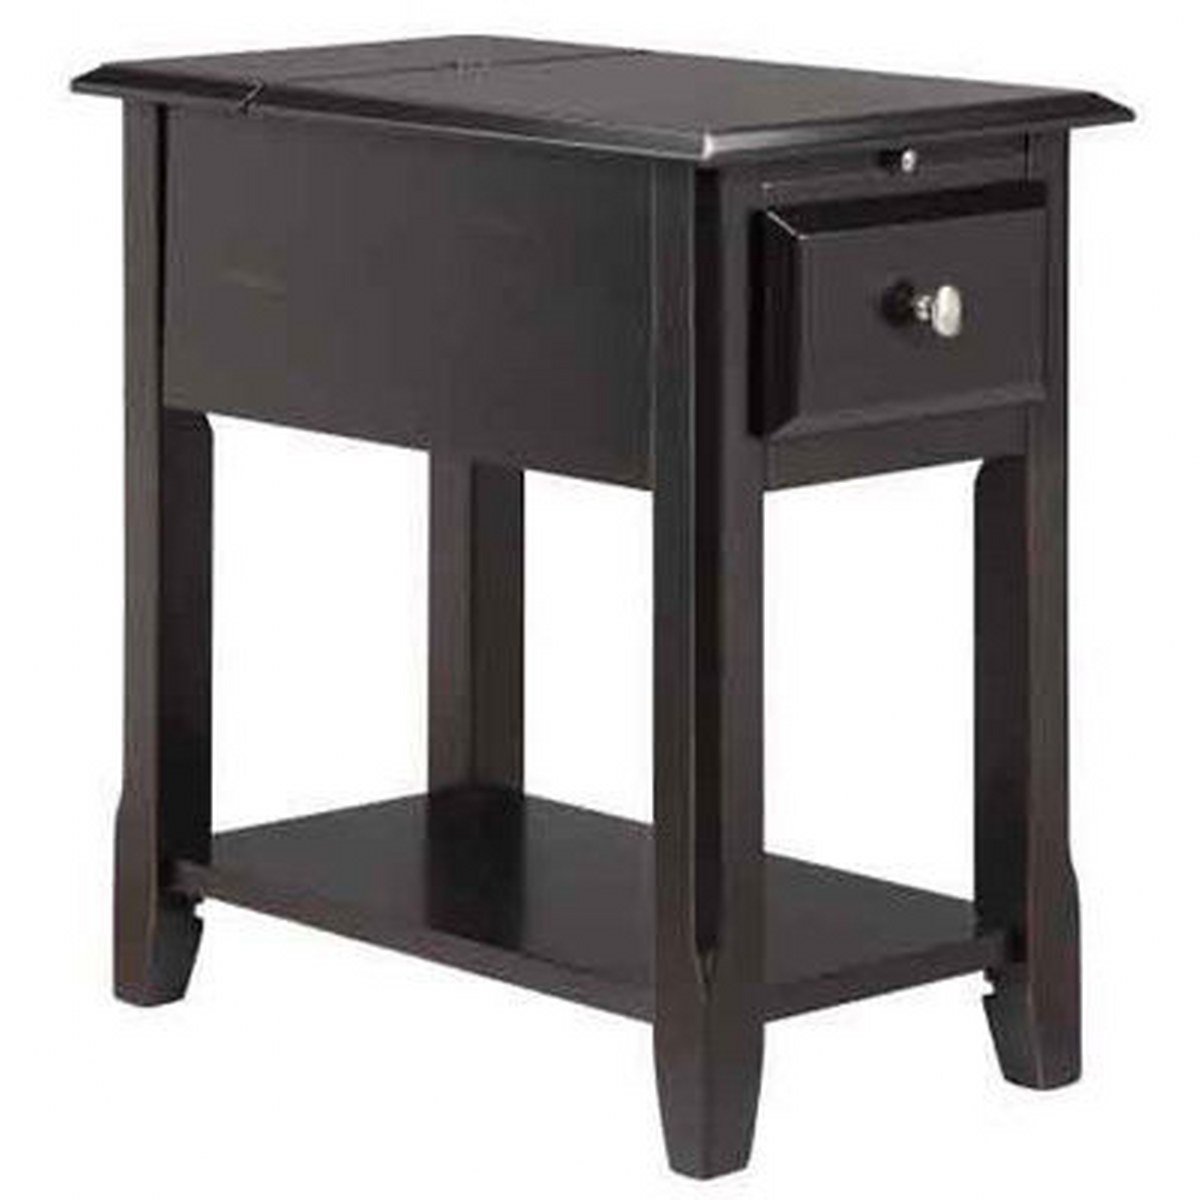 modhaus living modern style narrow nightstand rectangle white accent table wooden black chairsider utility with storage tray and drawer includes pen bedroom lights round gold very